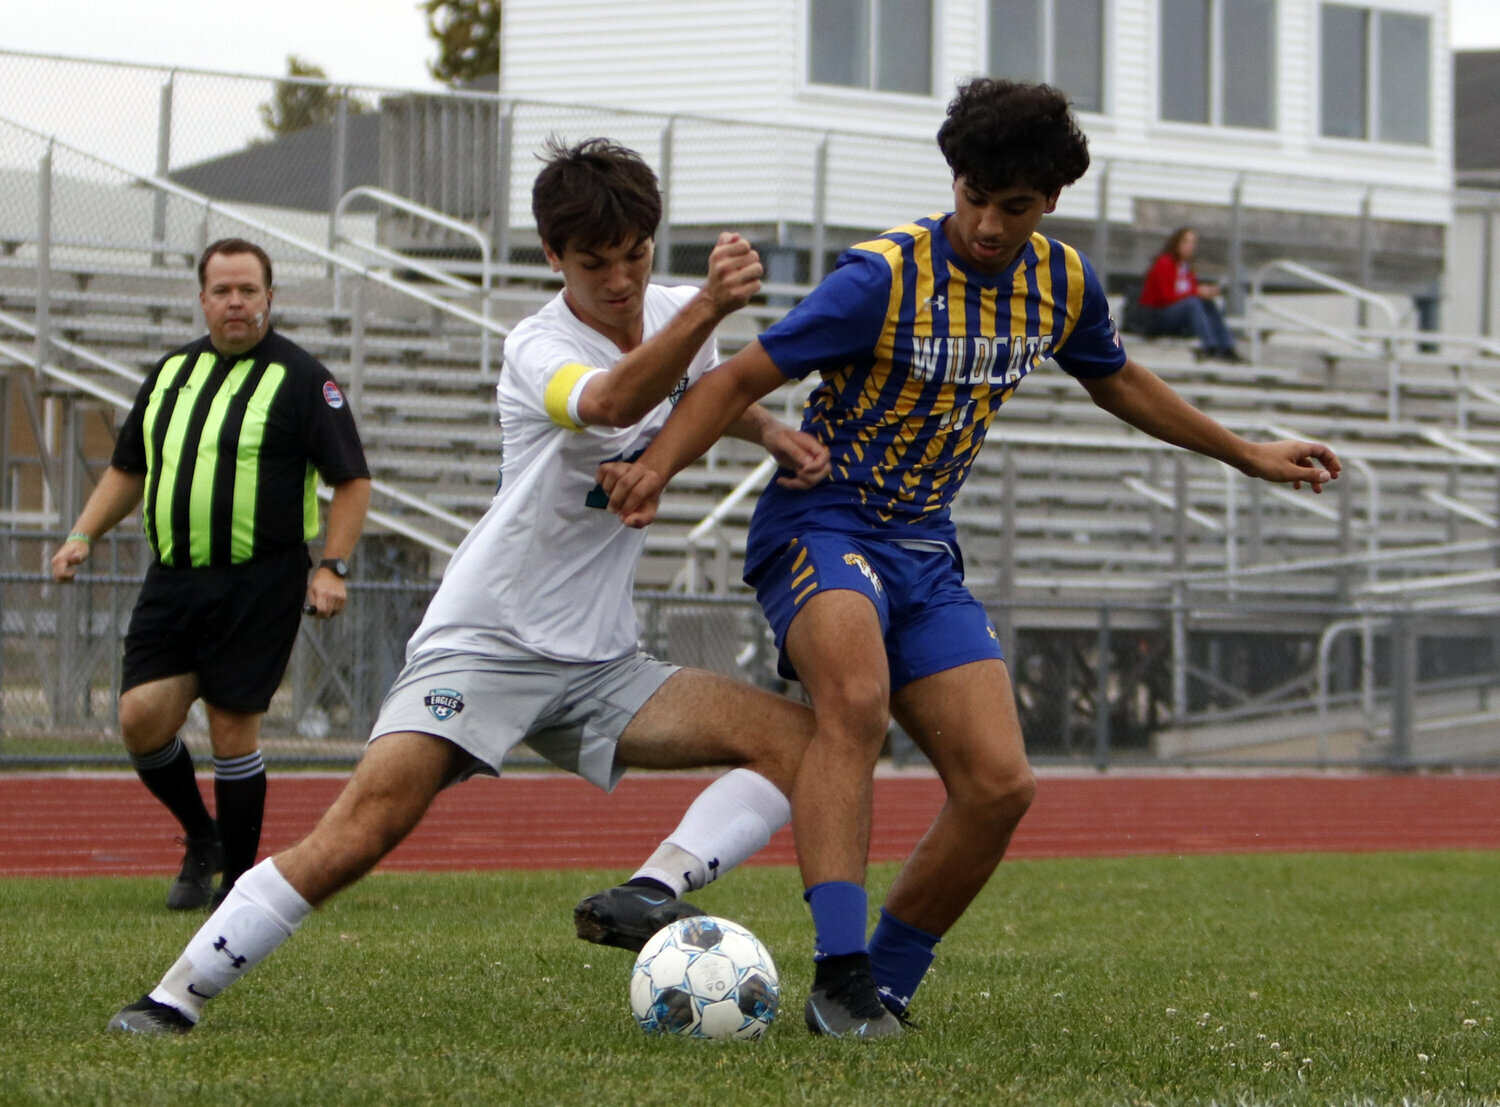 Laith Abualzulof (right) battles for possession of the ball during a game against Christian this past season.